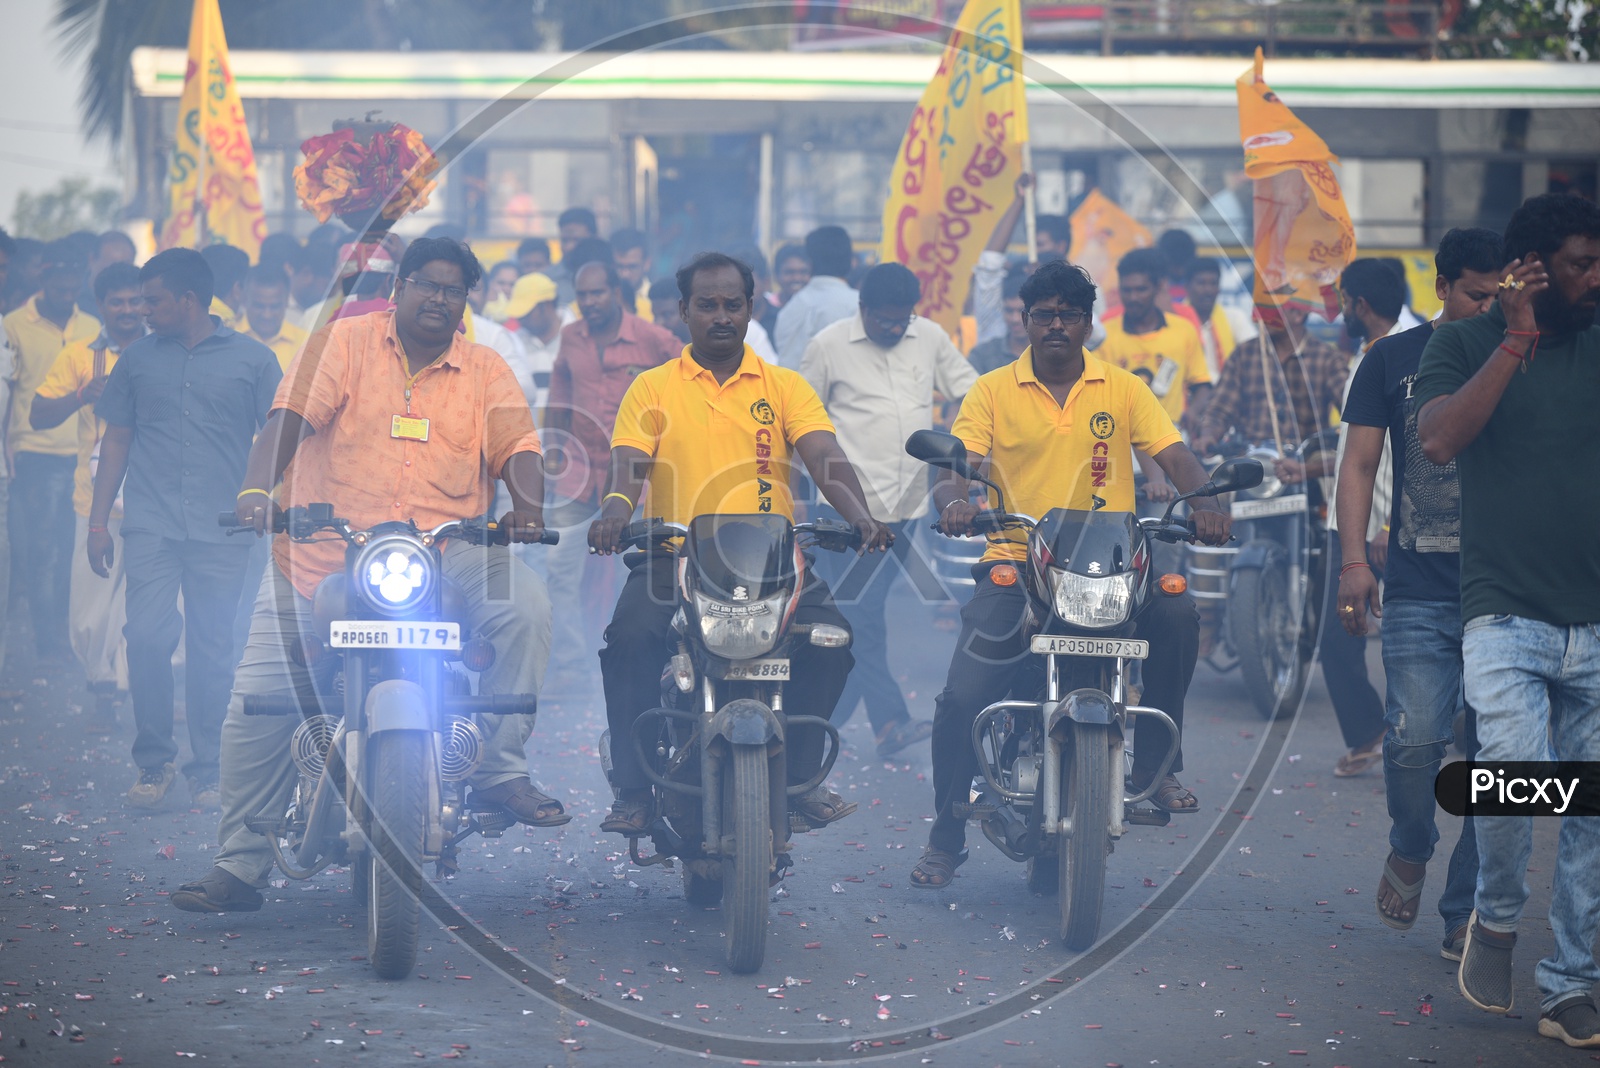 TDP party supporters wearing party t-shirts and riding bikes at an election campaign rally in Amalapuram